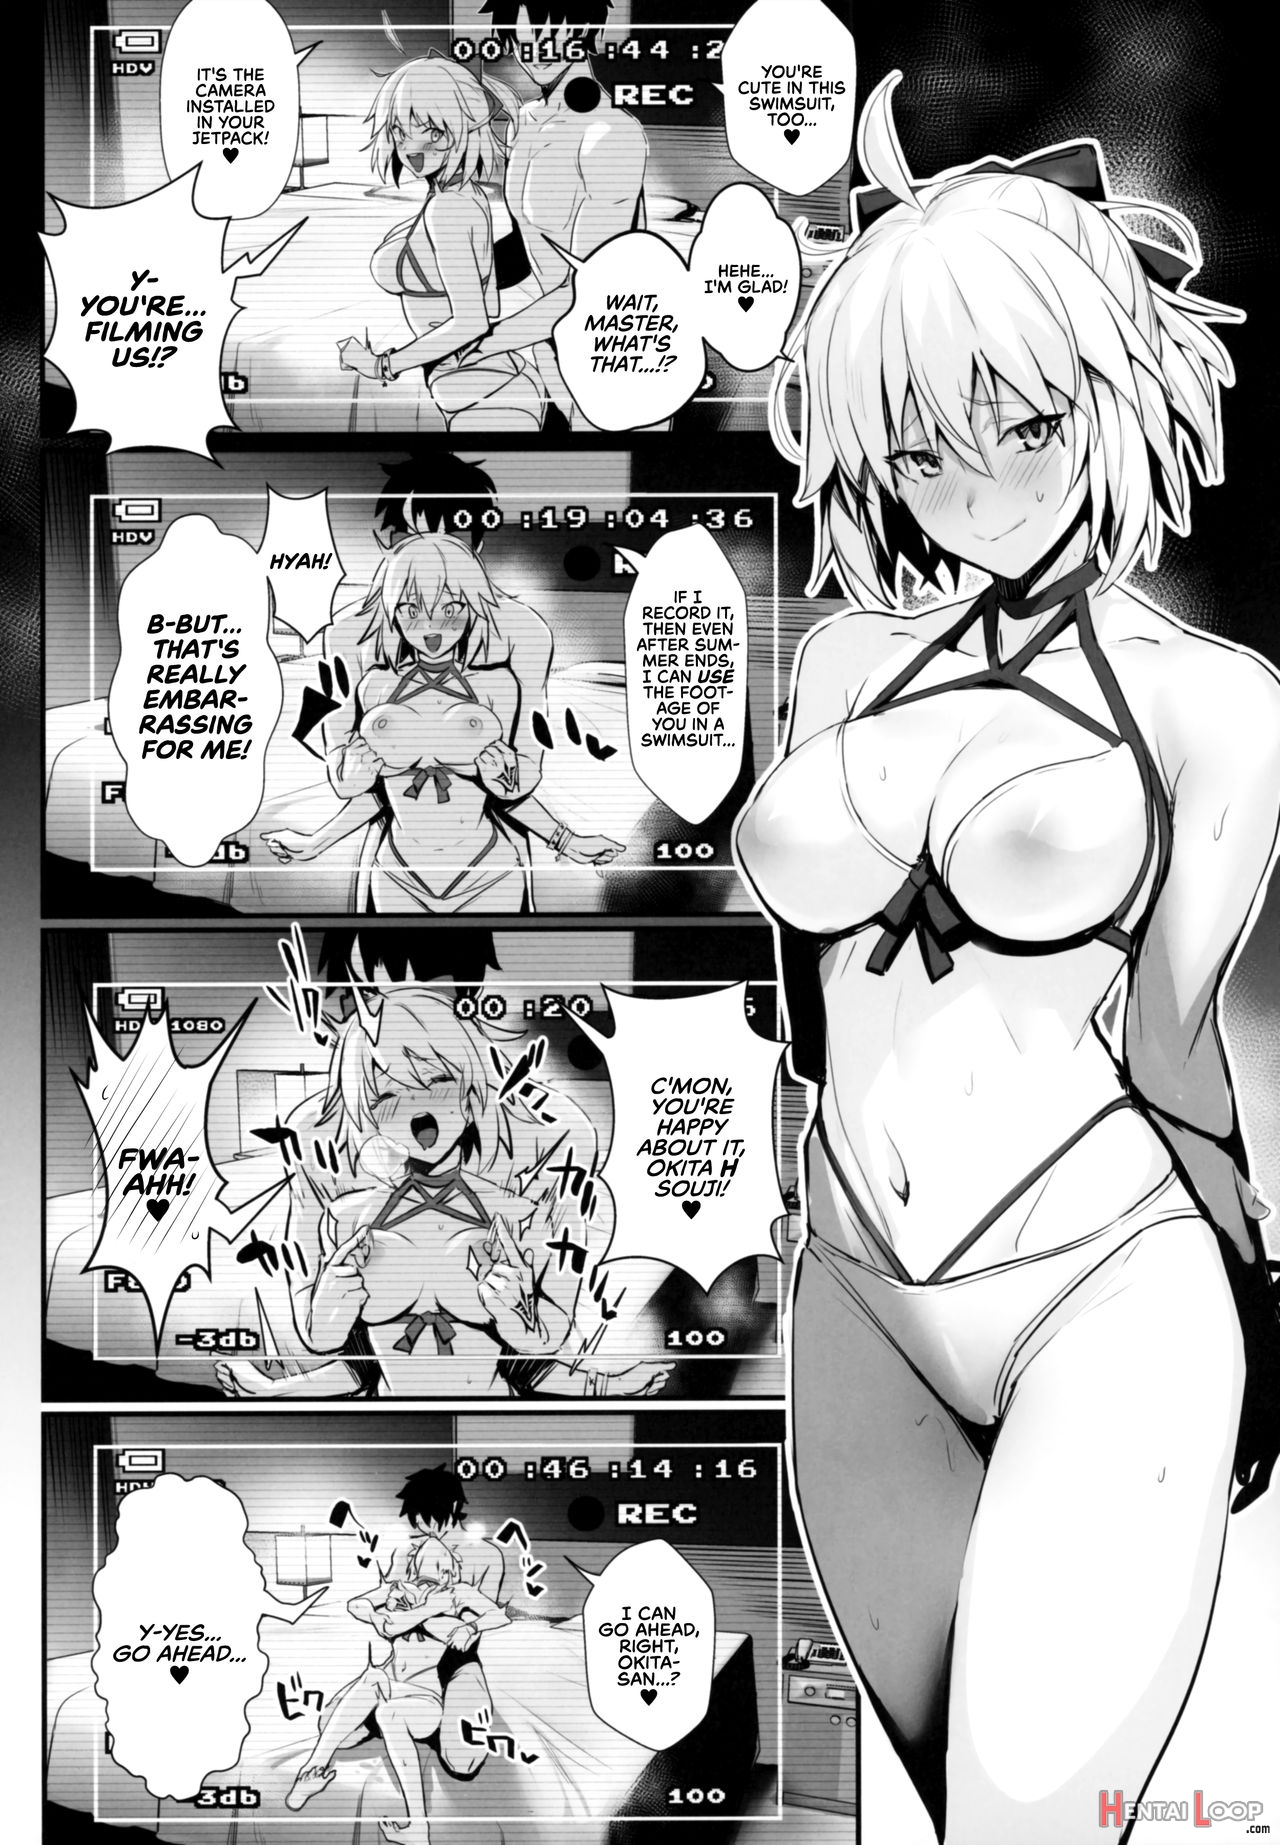 Swimsuit Sex With Okita-san At A Love Hotel Until Morning page 15